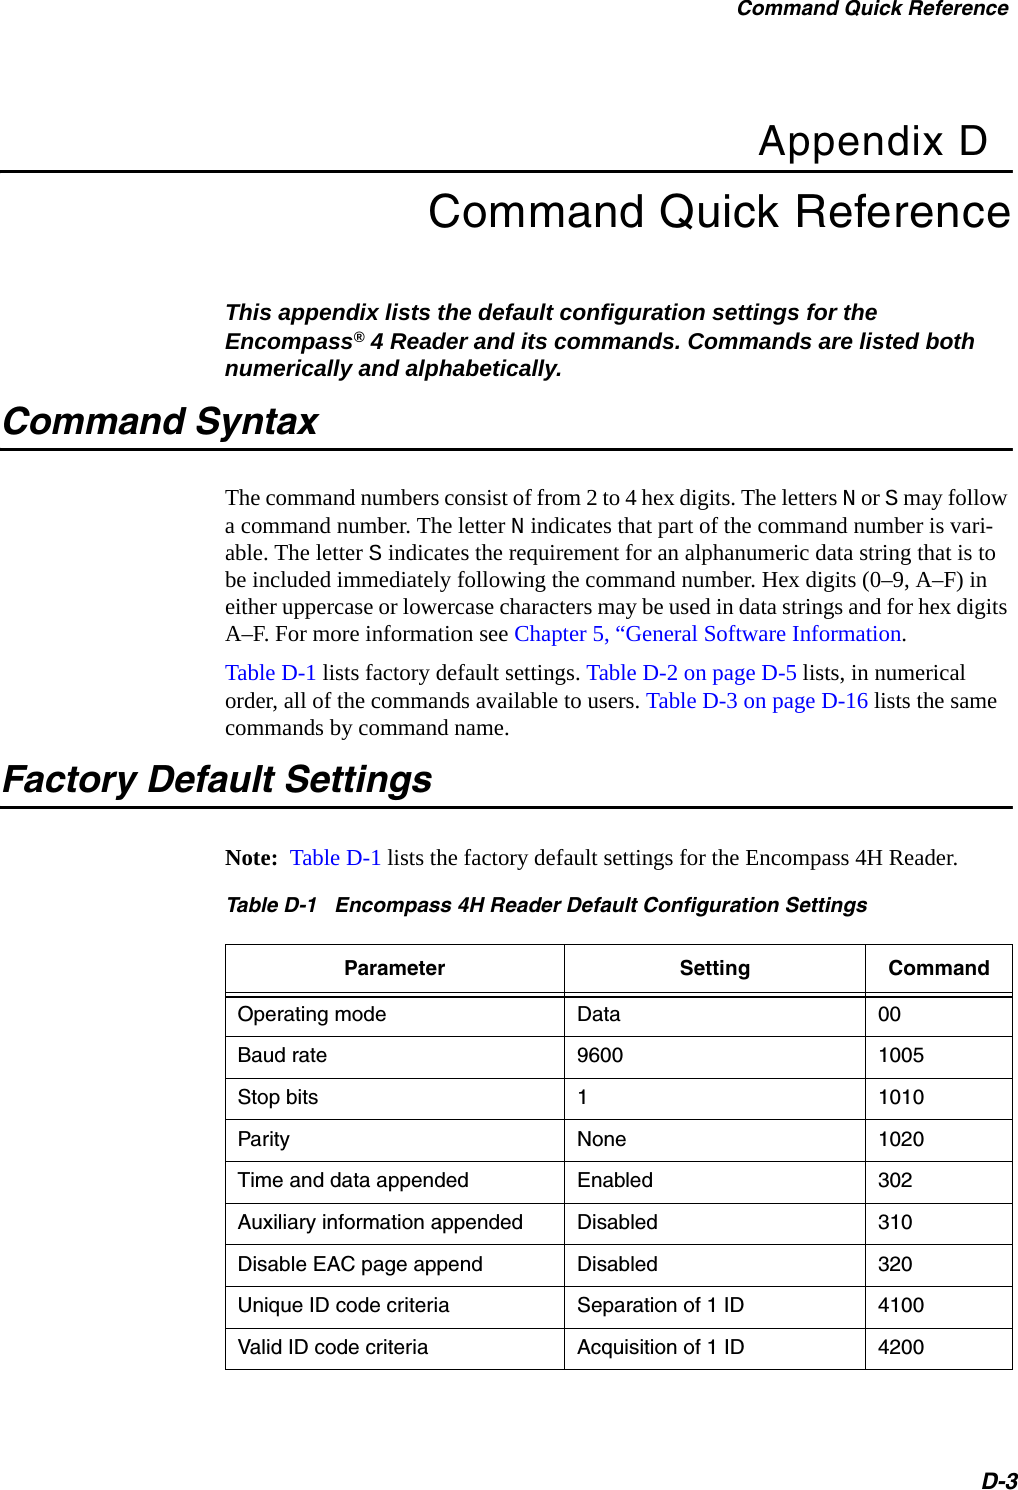 Command Quick ReferenceD-3Appendix DCommand Quick ReferenceThis appendix lists the default configuration settings for the Encompass® 4 Reader and its commands. Commands are listed both numerically and alphabetically.Command SyntaxThe command numbers consist of from 2 to 4 hex digits. The letters N or S may follow a command number. The letter N indicates that part of the command number is vari-able. The letter S indicates the requirement for an alphanumeric data string that is to be included immediately following the command number. Hex digits (0–9, A–F) in either uppercase or lowercase characters may be used in data strings and for hex digits A–F. For more information see Chapter 5, “General Software Information.Table D-1 lists factory default settings. Table D-2 on page D-5 lists, in numerical order, all of the commands available to users. Table D-3 on page D-16 lists the same commands by command name.Factory Default SettingsNote:  Table D-1 lists the factory default settings for the Encompass 4H Reader.Table D-1   Encompass 4H Reader Default Configuration Settings Parameter Setting CommandOperating mode Data 00Baud rate 9600 1005Stop bits 11010Parity None 1020Time and data appended Enabled 302Auxiliary information appended Disabled 310Disable EAC page append Disabled 320Unique ID code criteria Separation of 1 ID 4100Valid ID code criteria Acquisition of 1 ID 4200